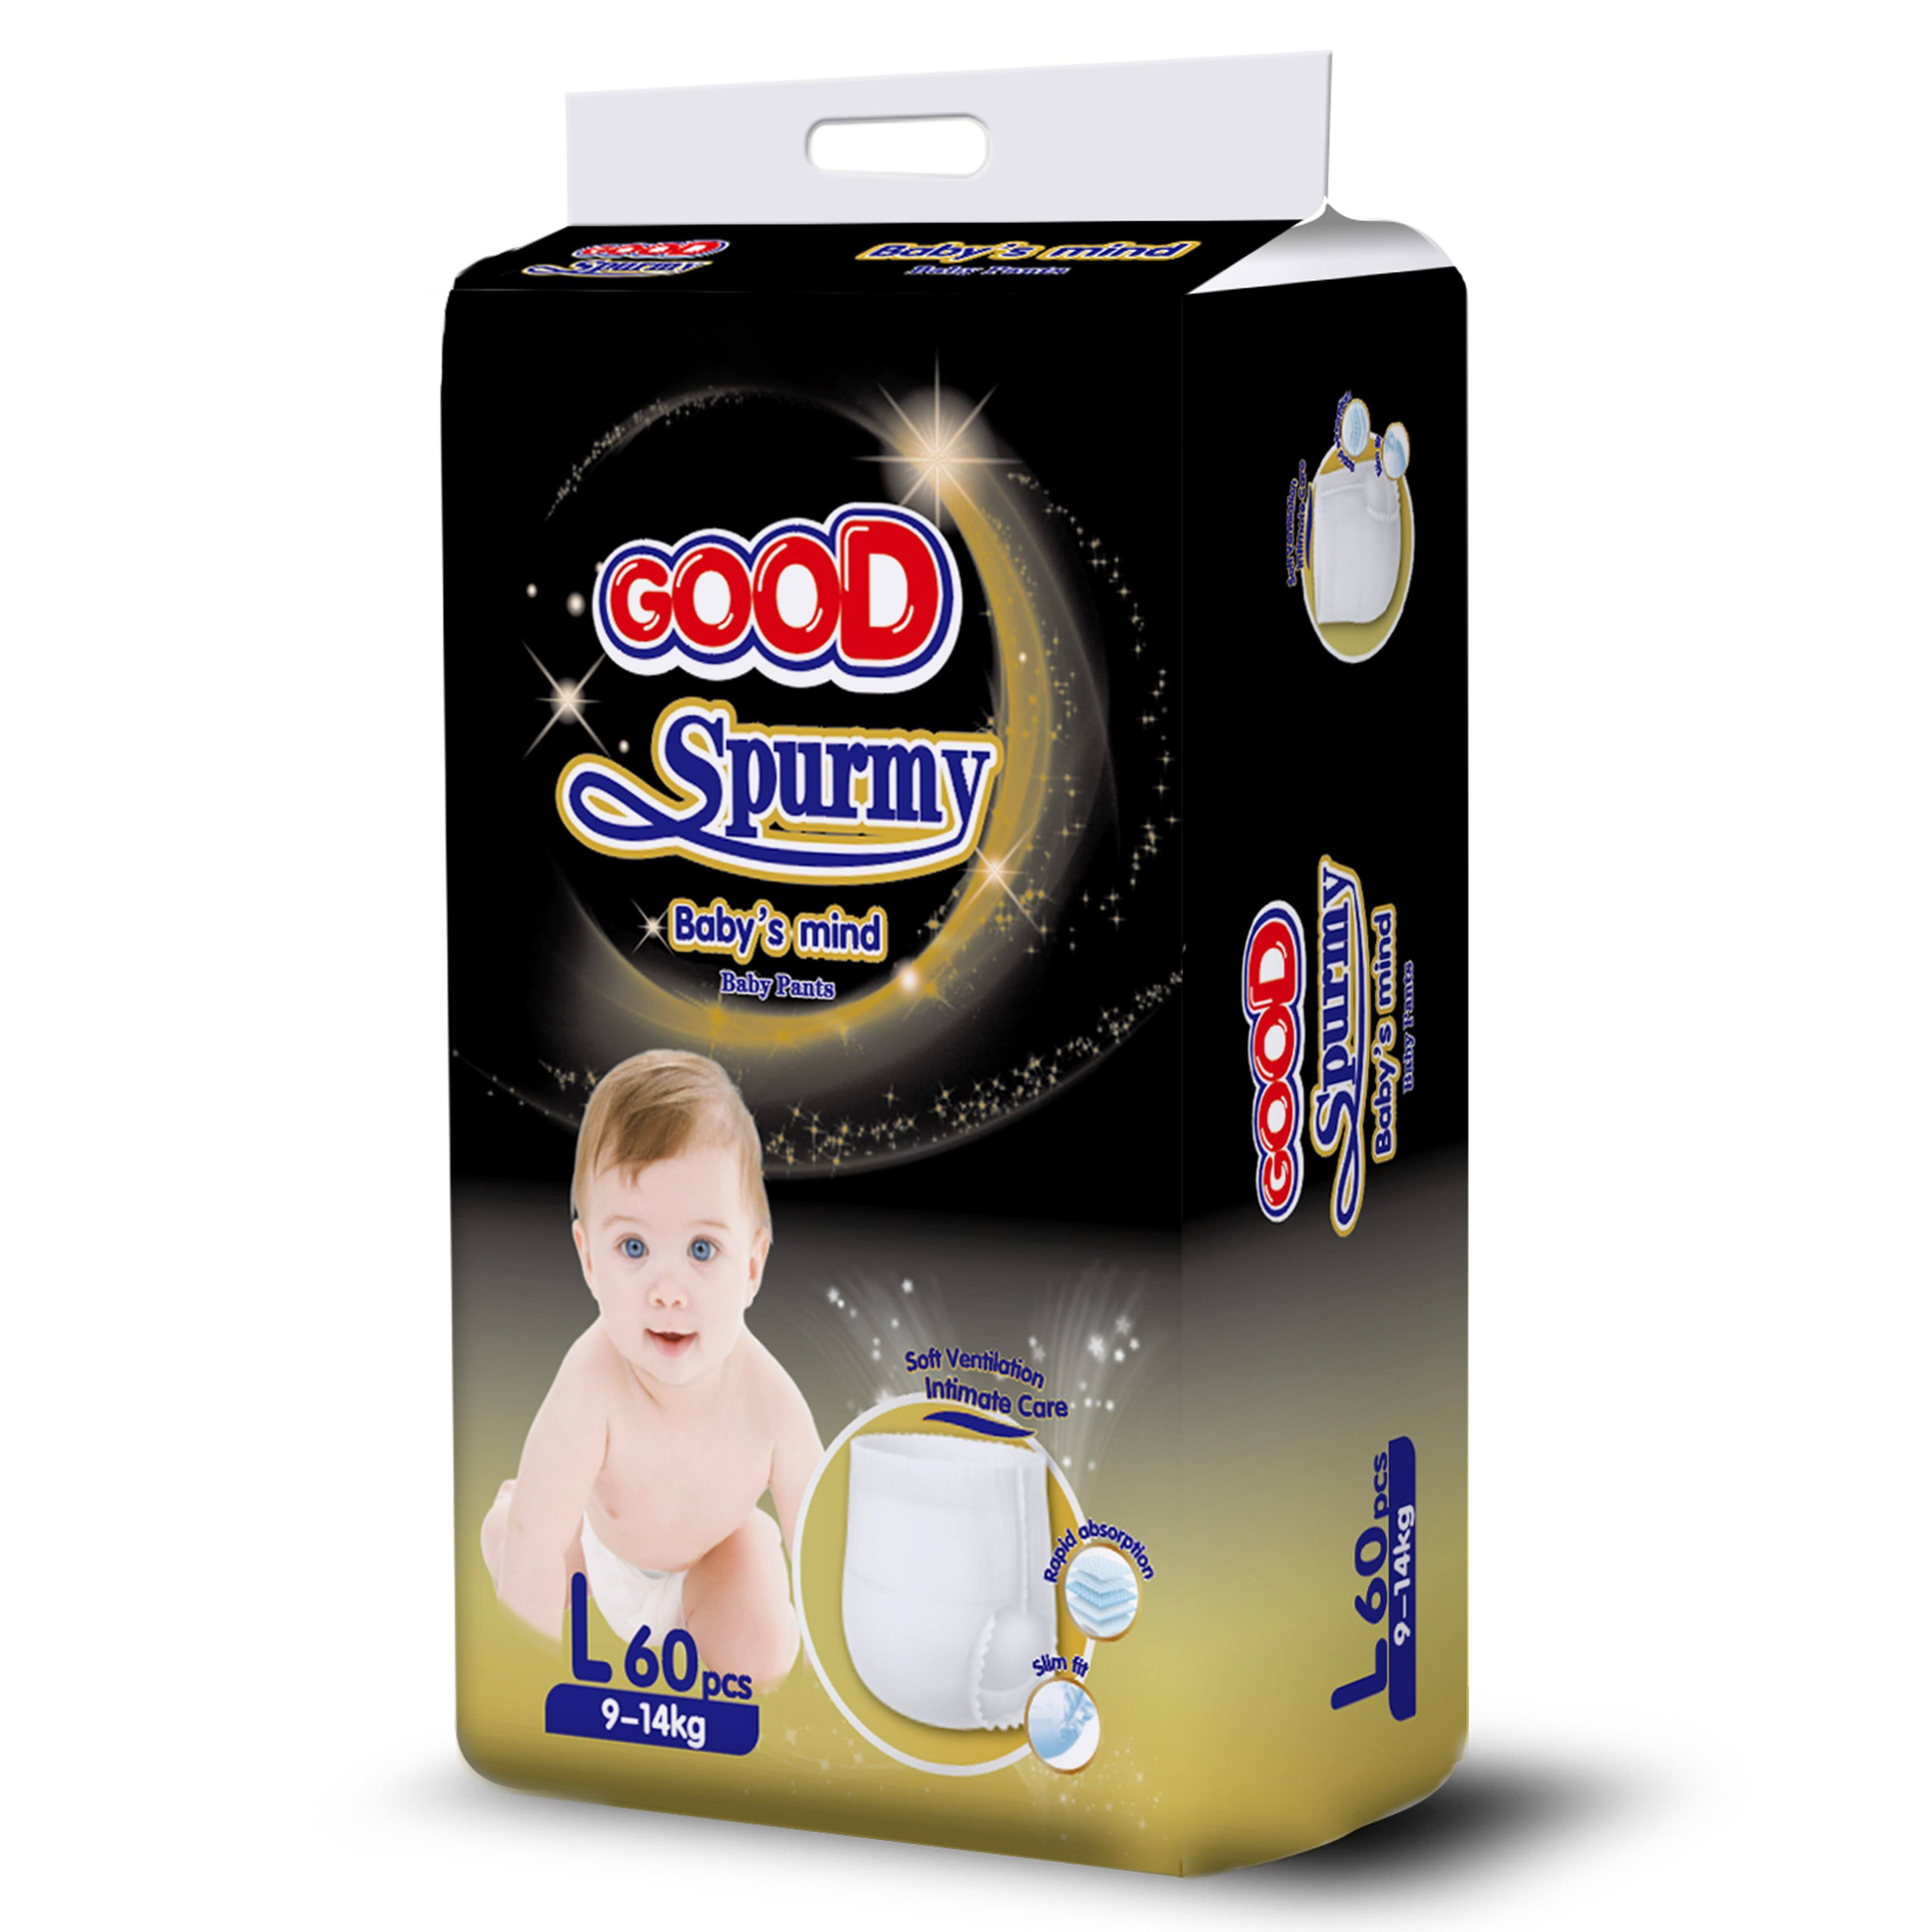 Feather Diapers - Next Gen Baby Diapers That Breathes | Star of Baby